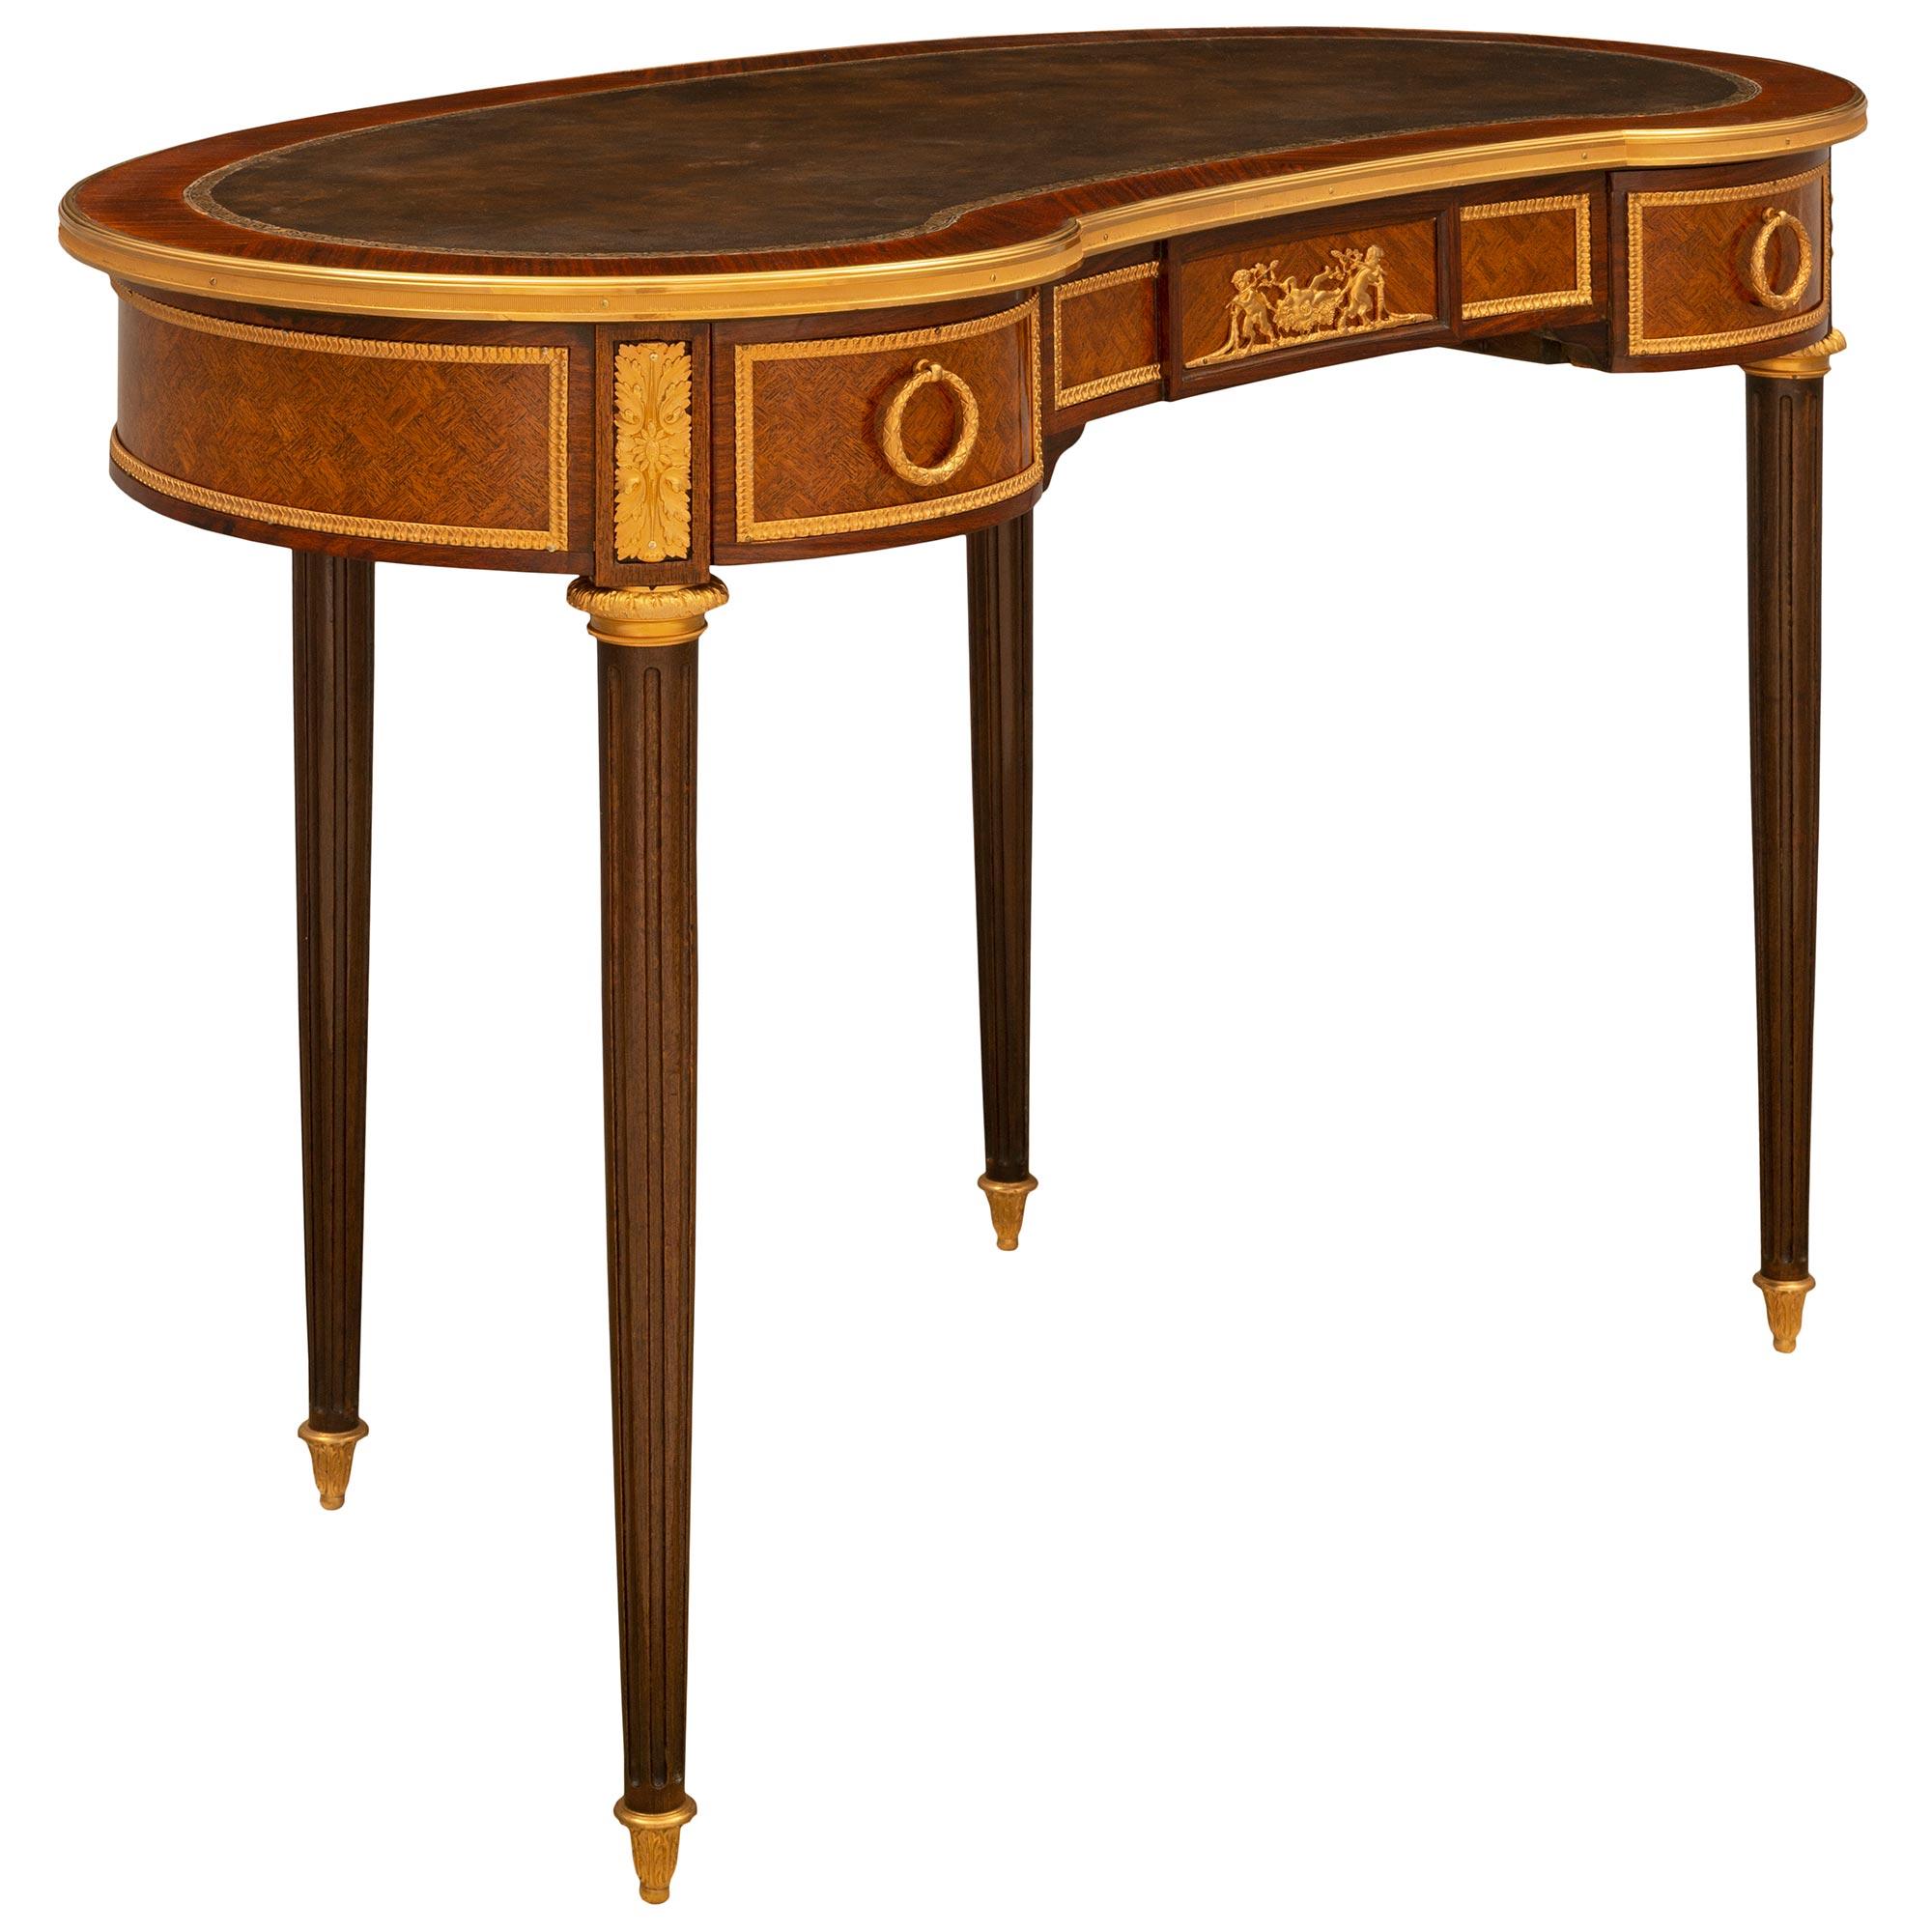 French 19th Century Tulipwood Parquetry Desk, Attributed to Linke In Good Condition For Sale In West Palm Beach, FL